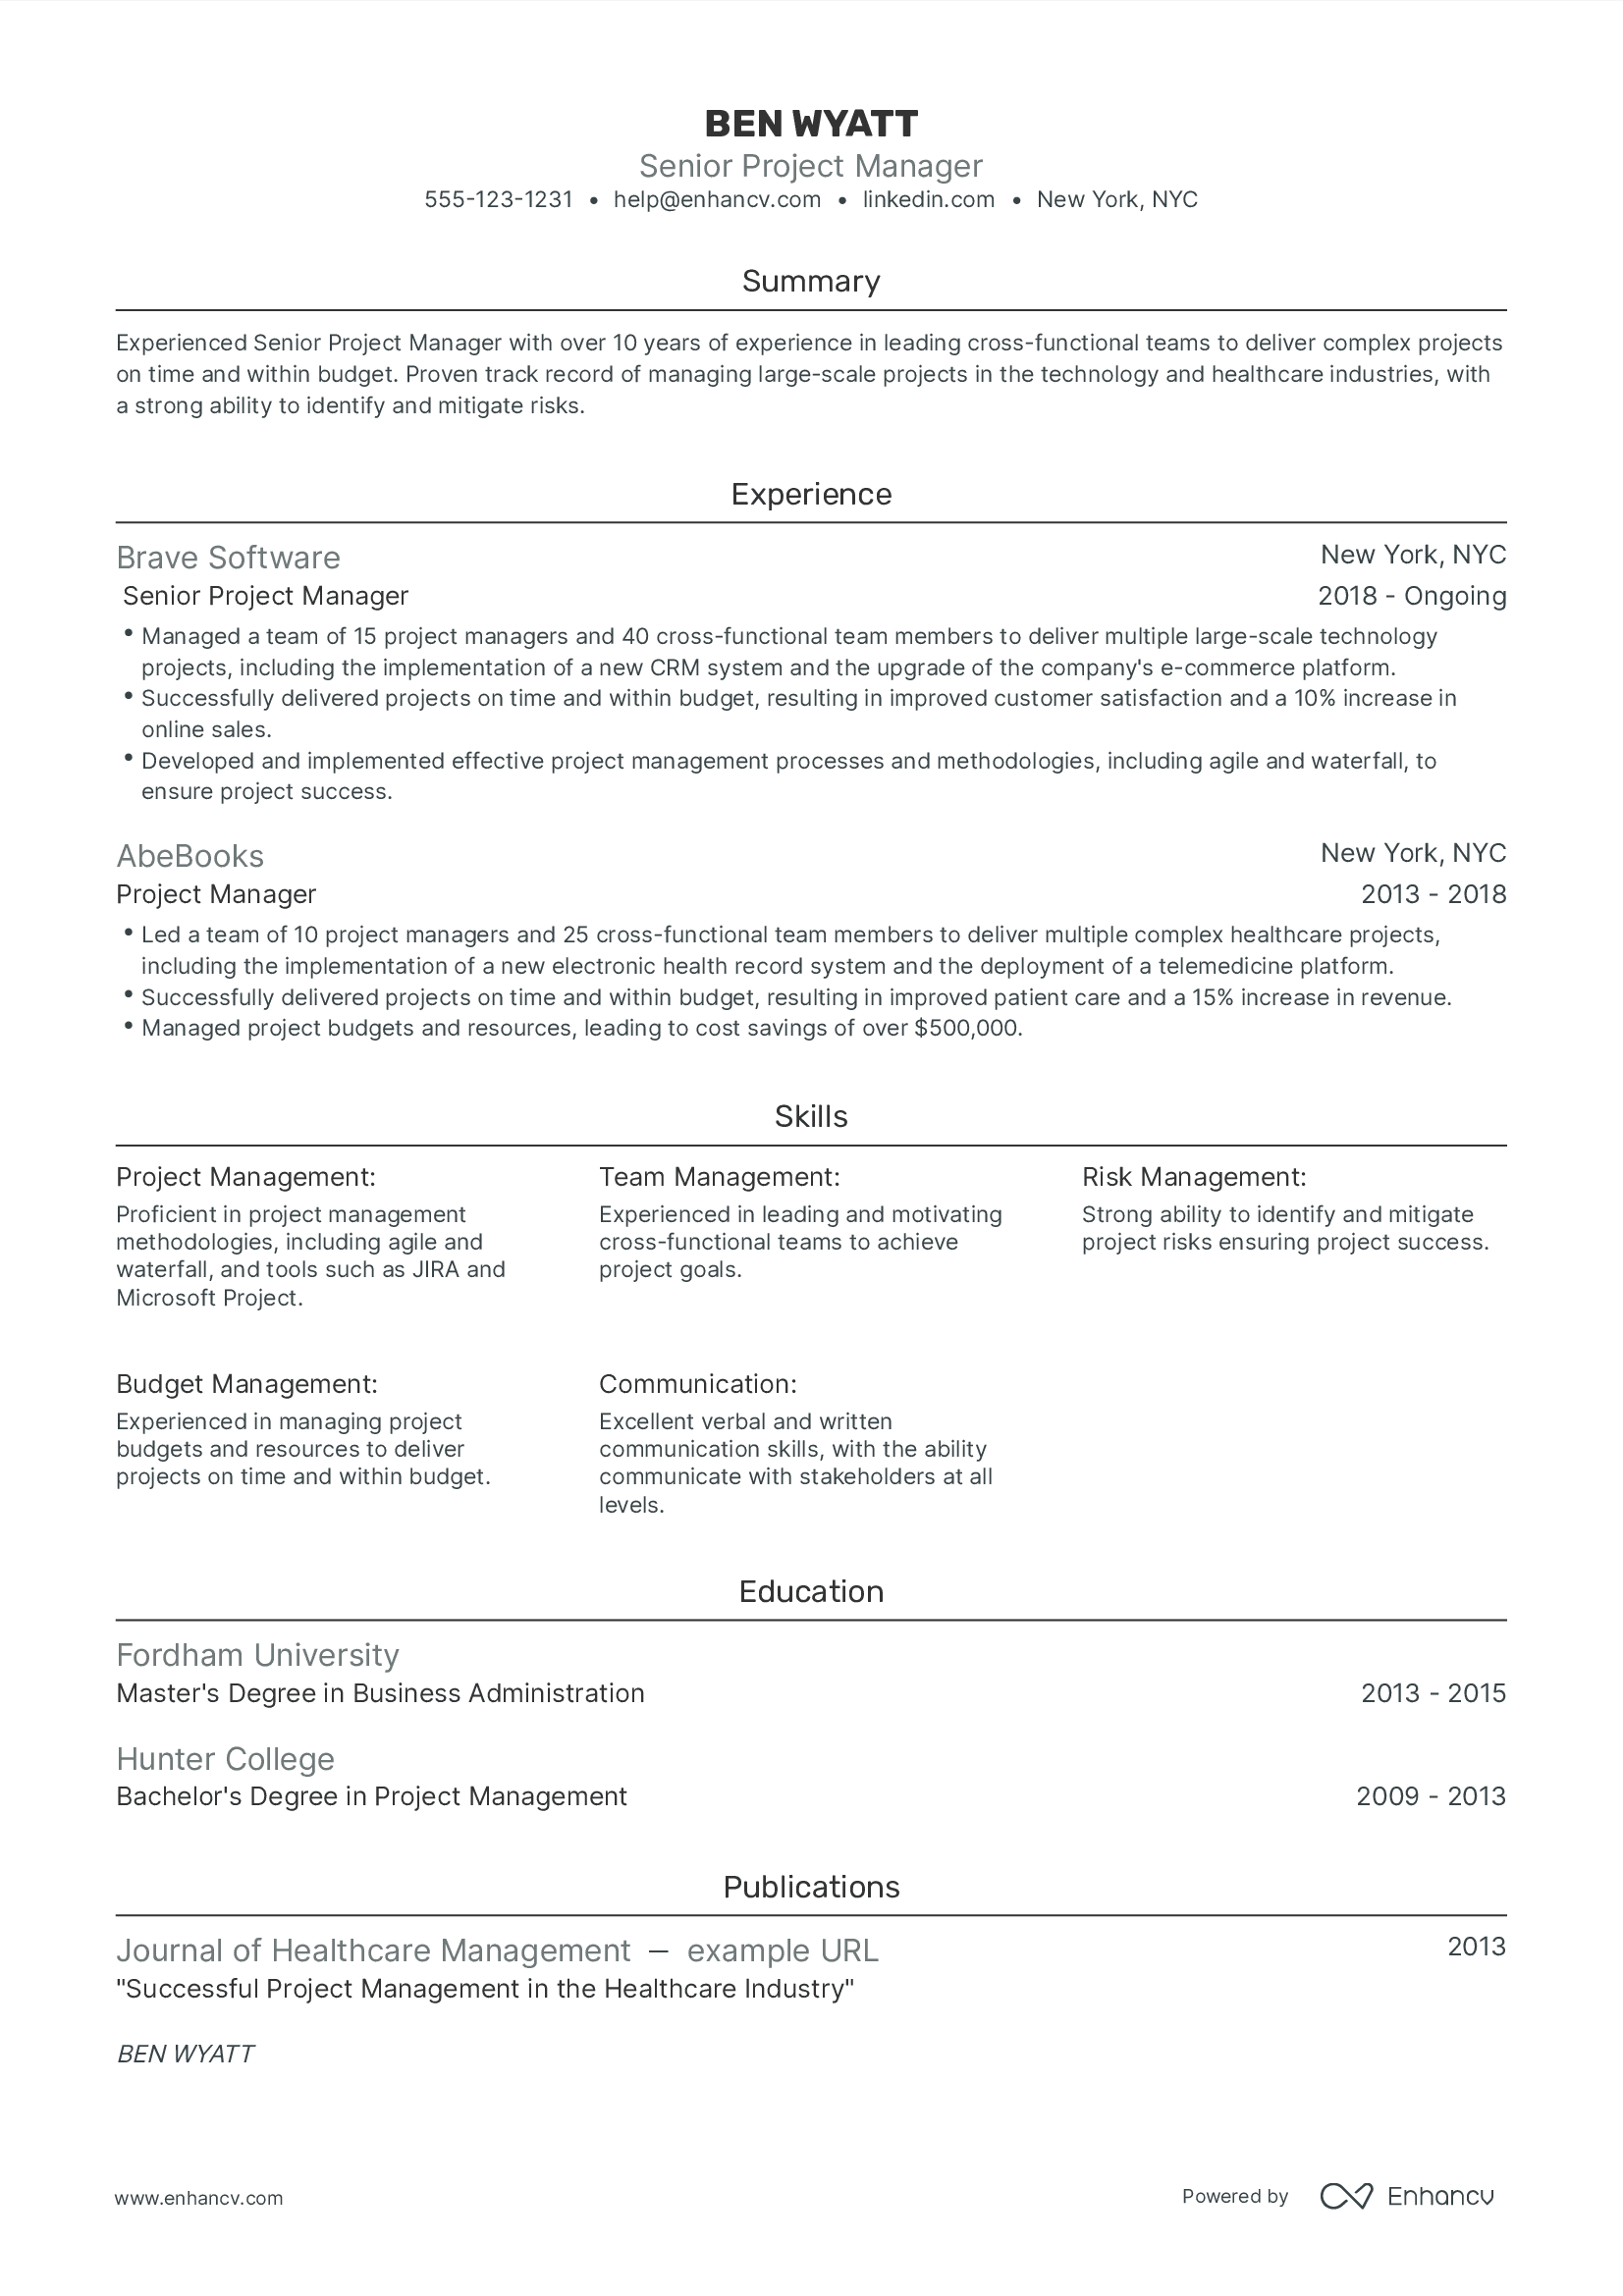 Senior Project Manager Resume Example.png